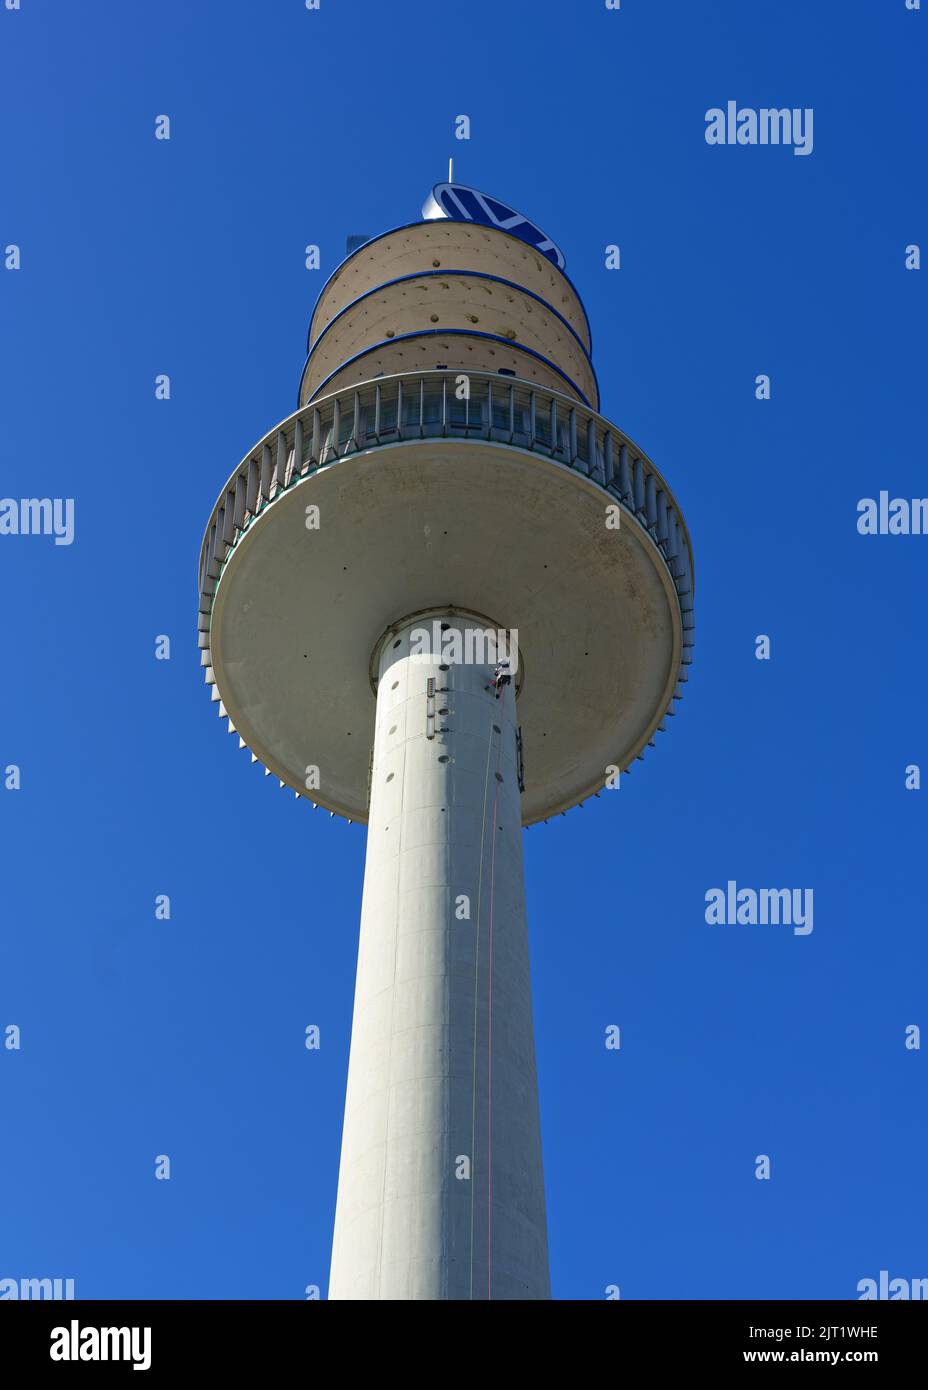 The 'Older TV Tower' with an industrial climber at work Stock Photo